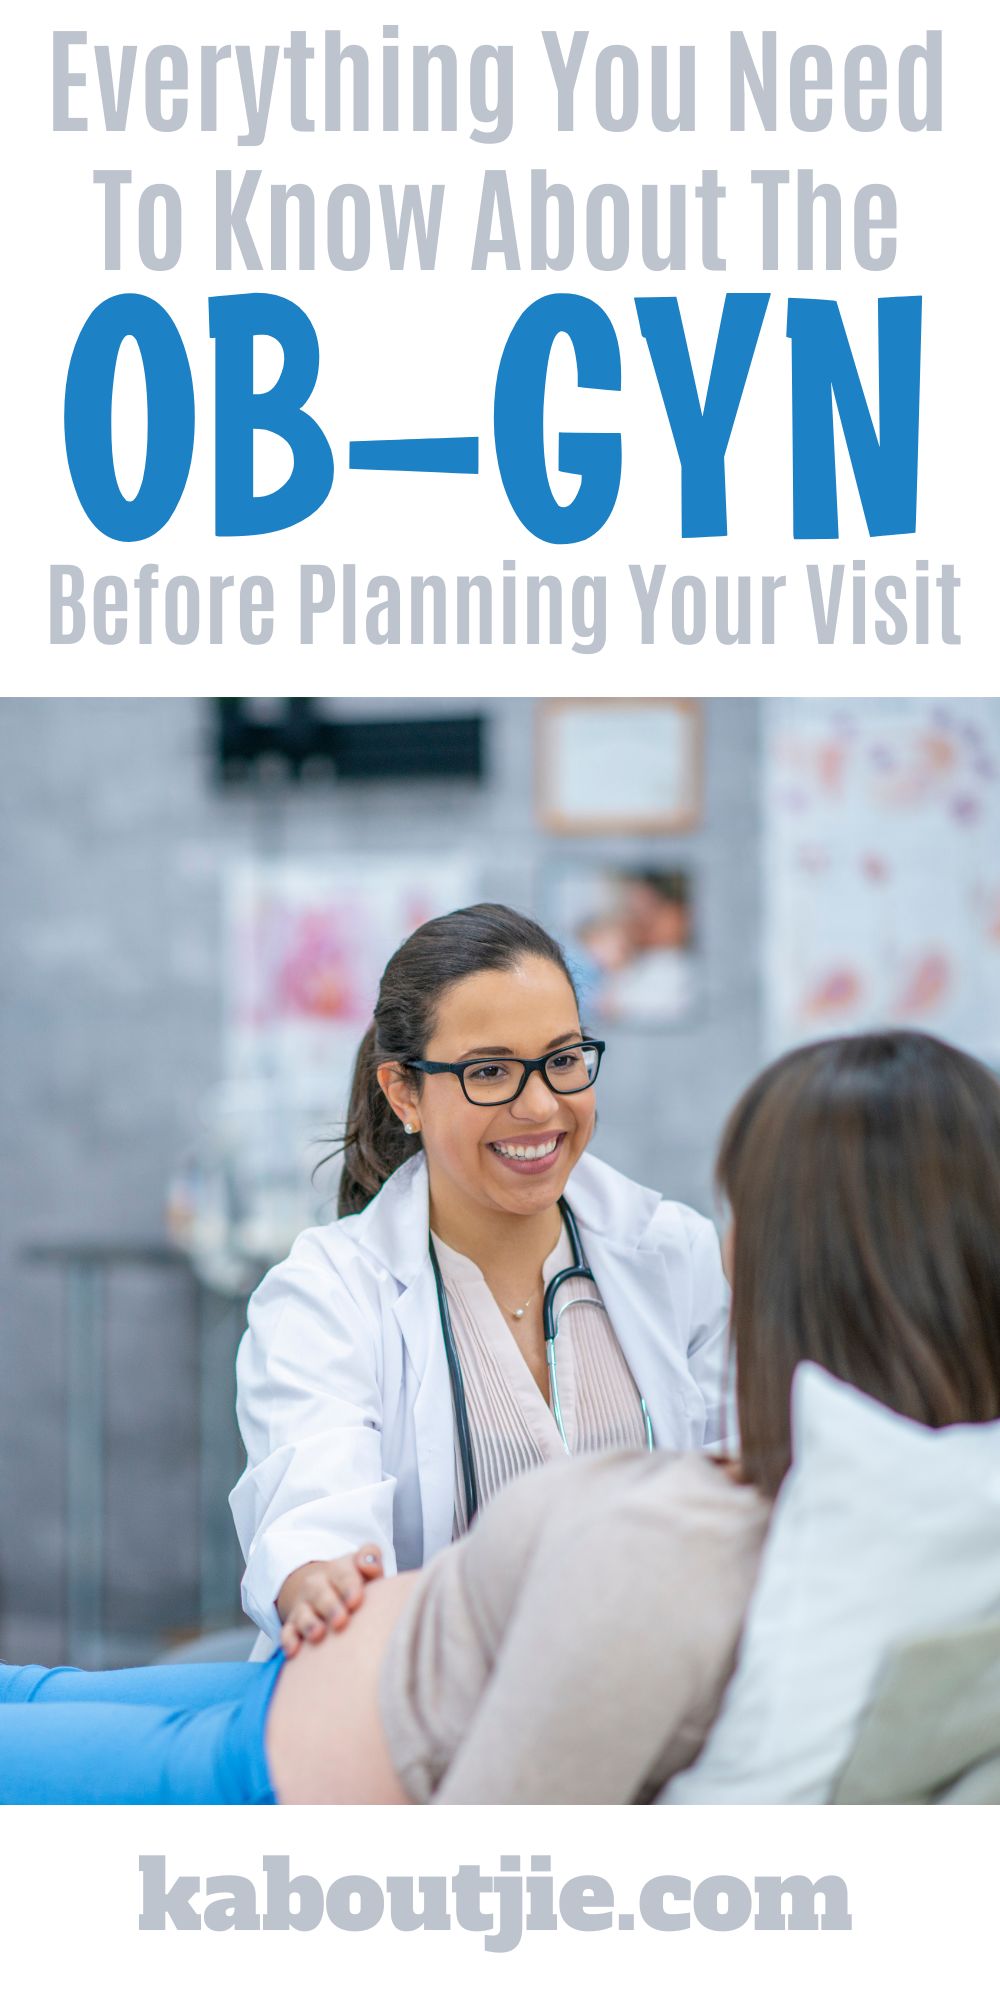 Visiting The OB-GYN? - Here's What You Need To Know